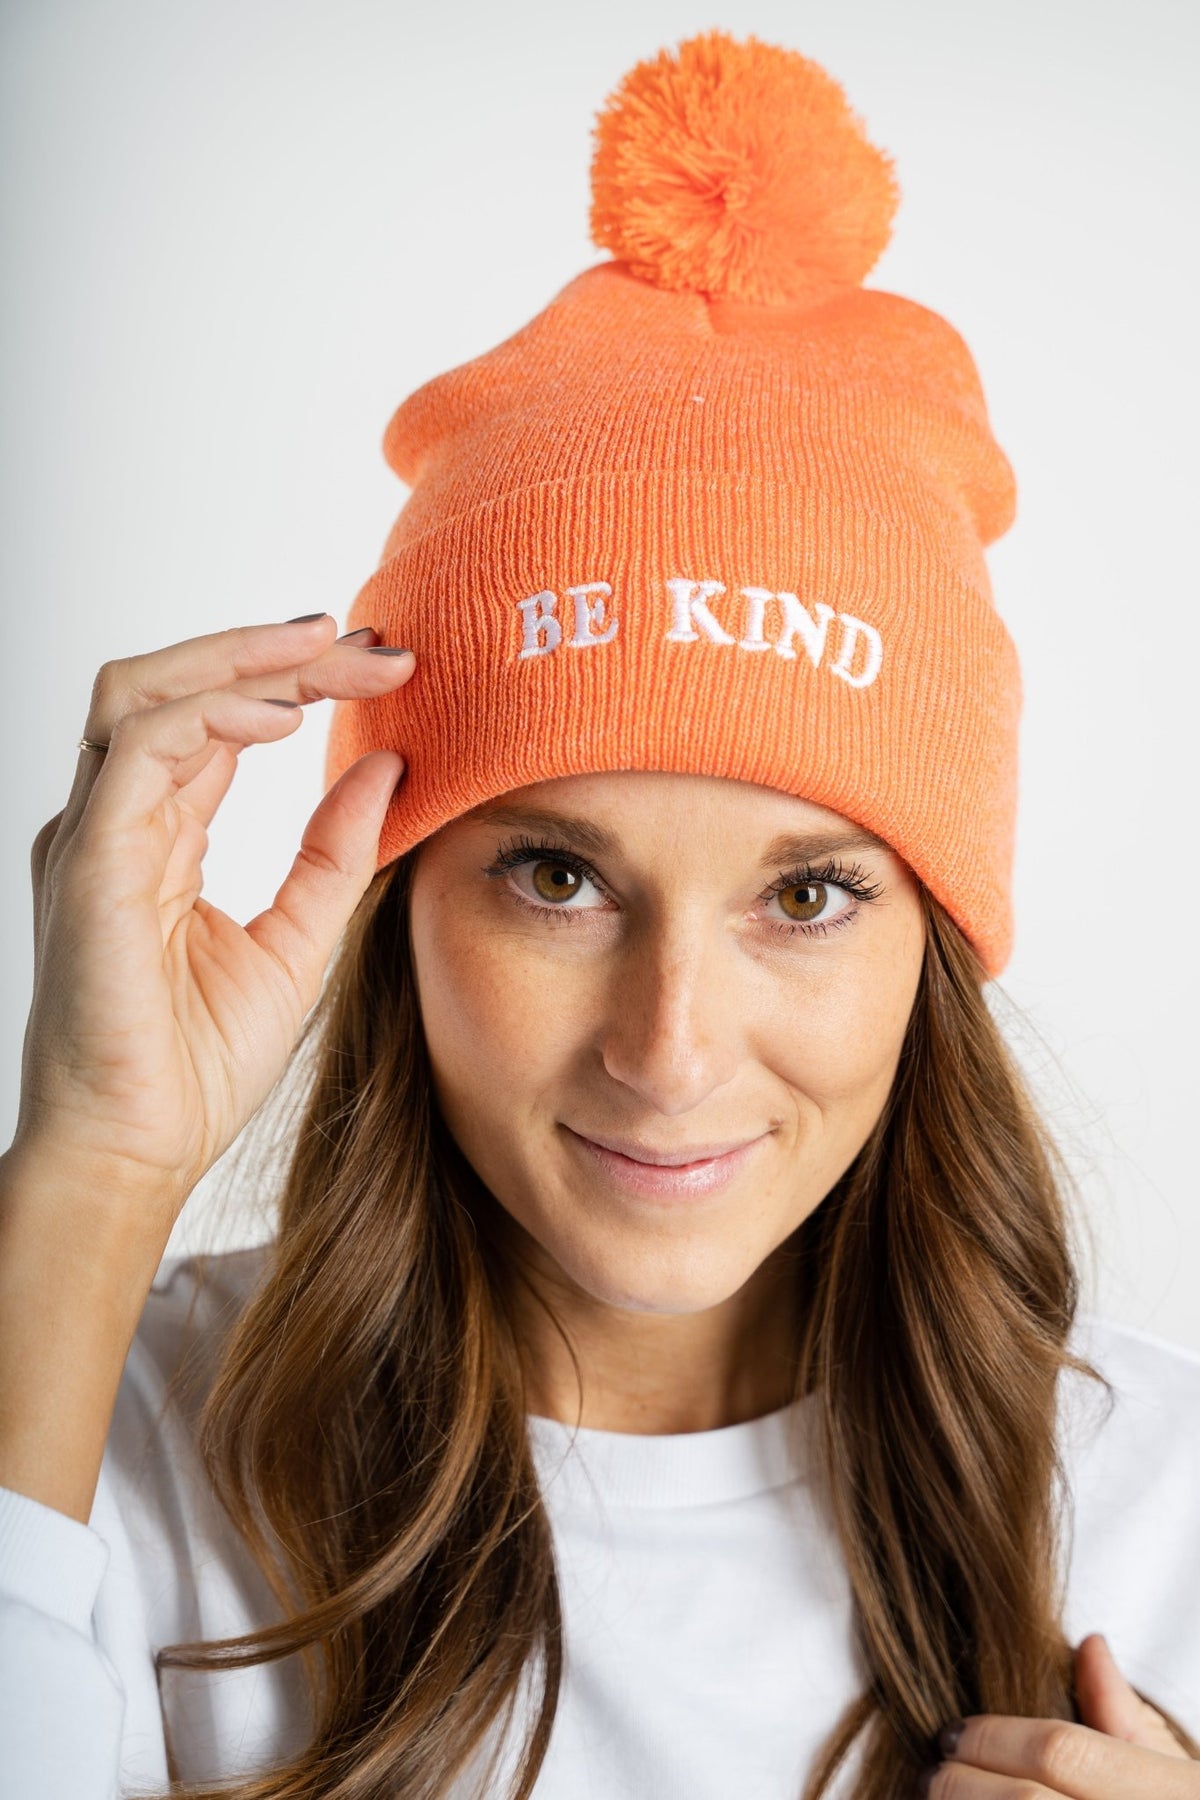 Be kind beanie coral - Trendy Beanies at Lush Fashion Lounge Boutique in Oklahoma City